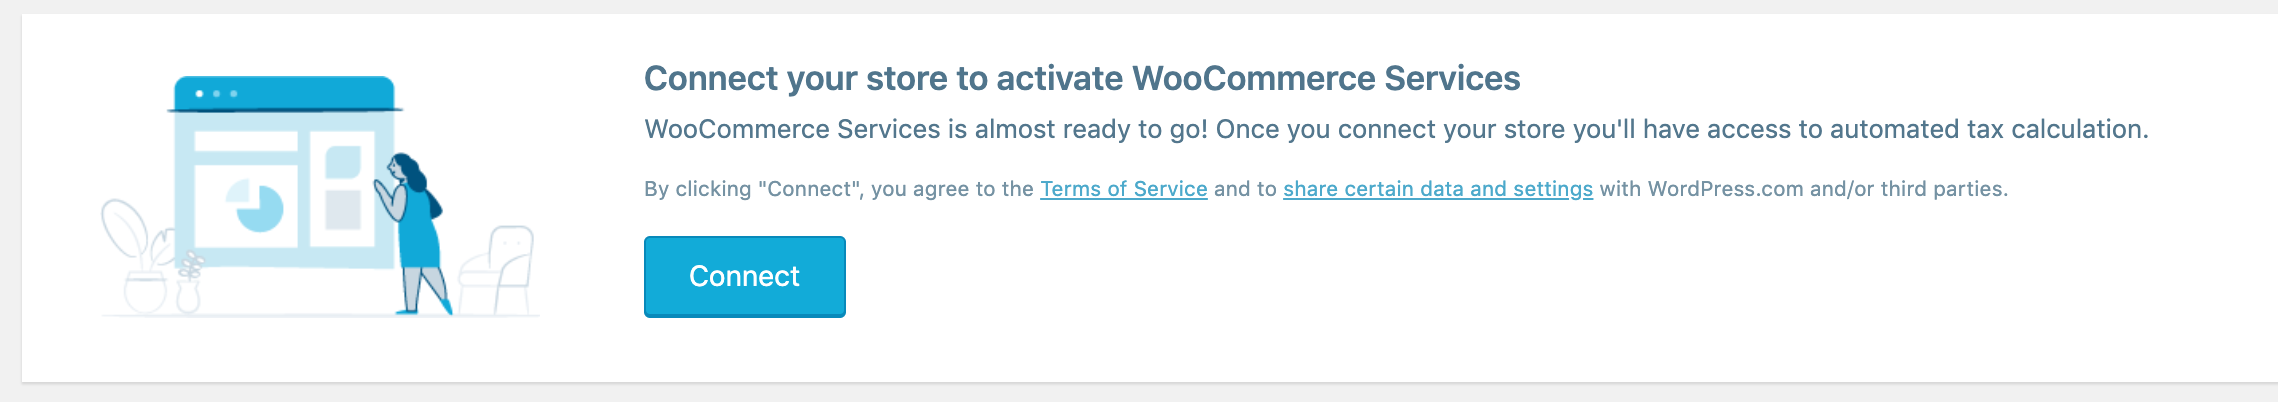 WooCommerce services